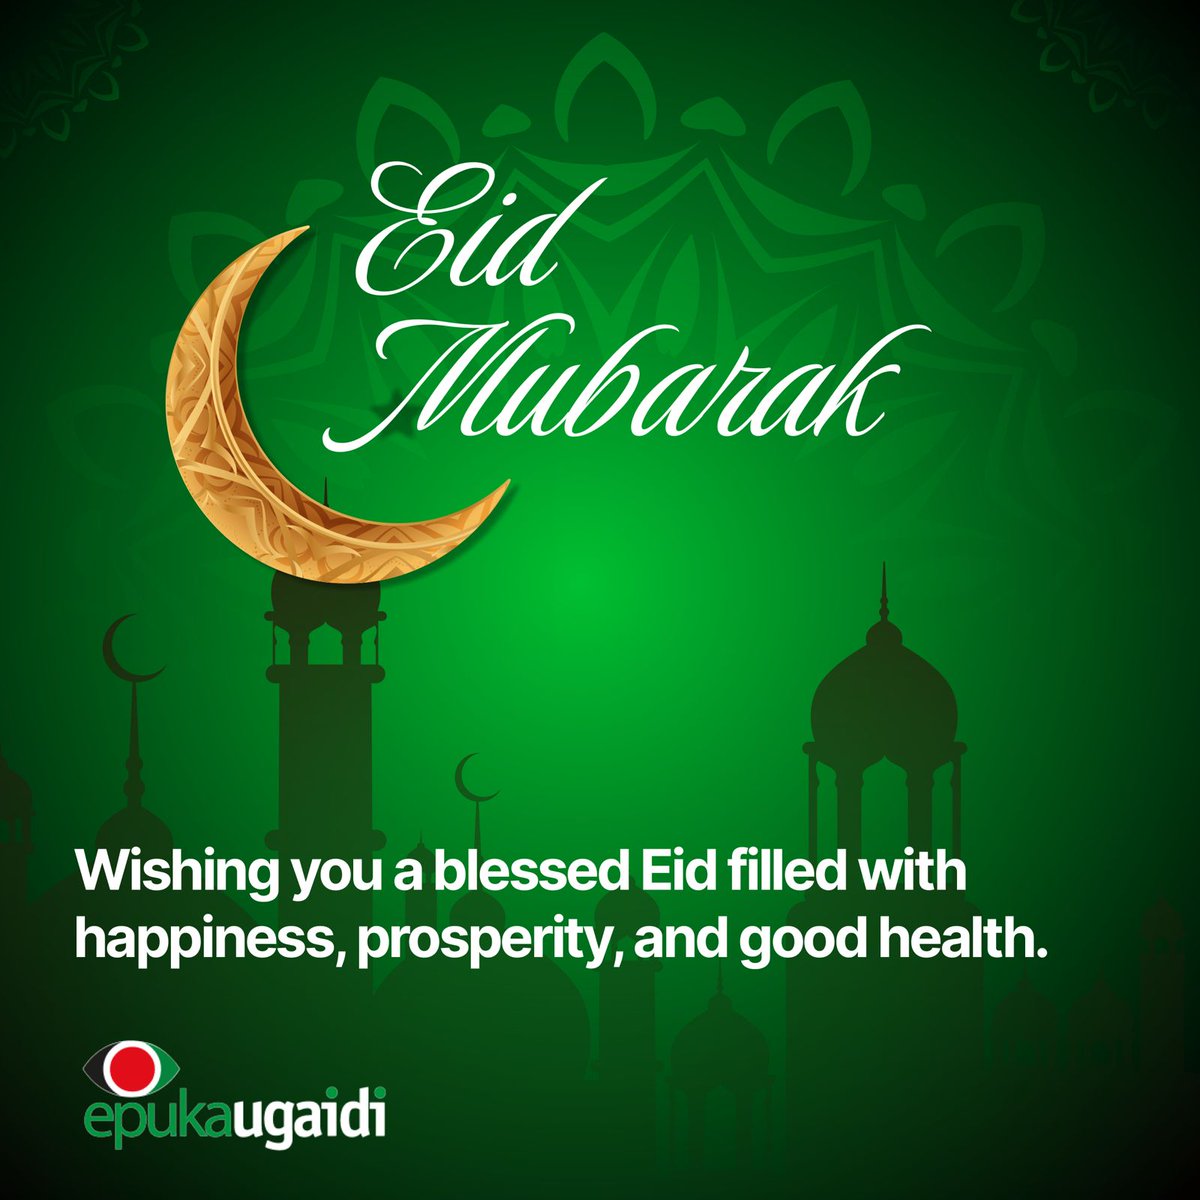 Eid Mubarak to our Muslim brothers and sisters. May this special day bring you and your loved ones joy, peace, and countless blessings. #SayNoToRadicalisation #Eid2024 #EidMubarak